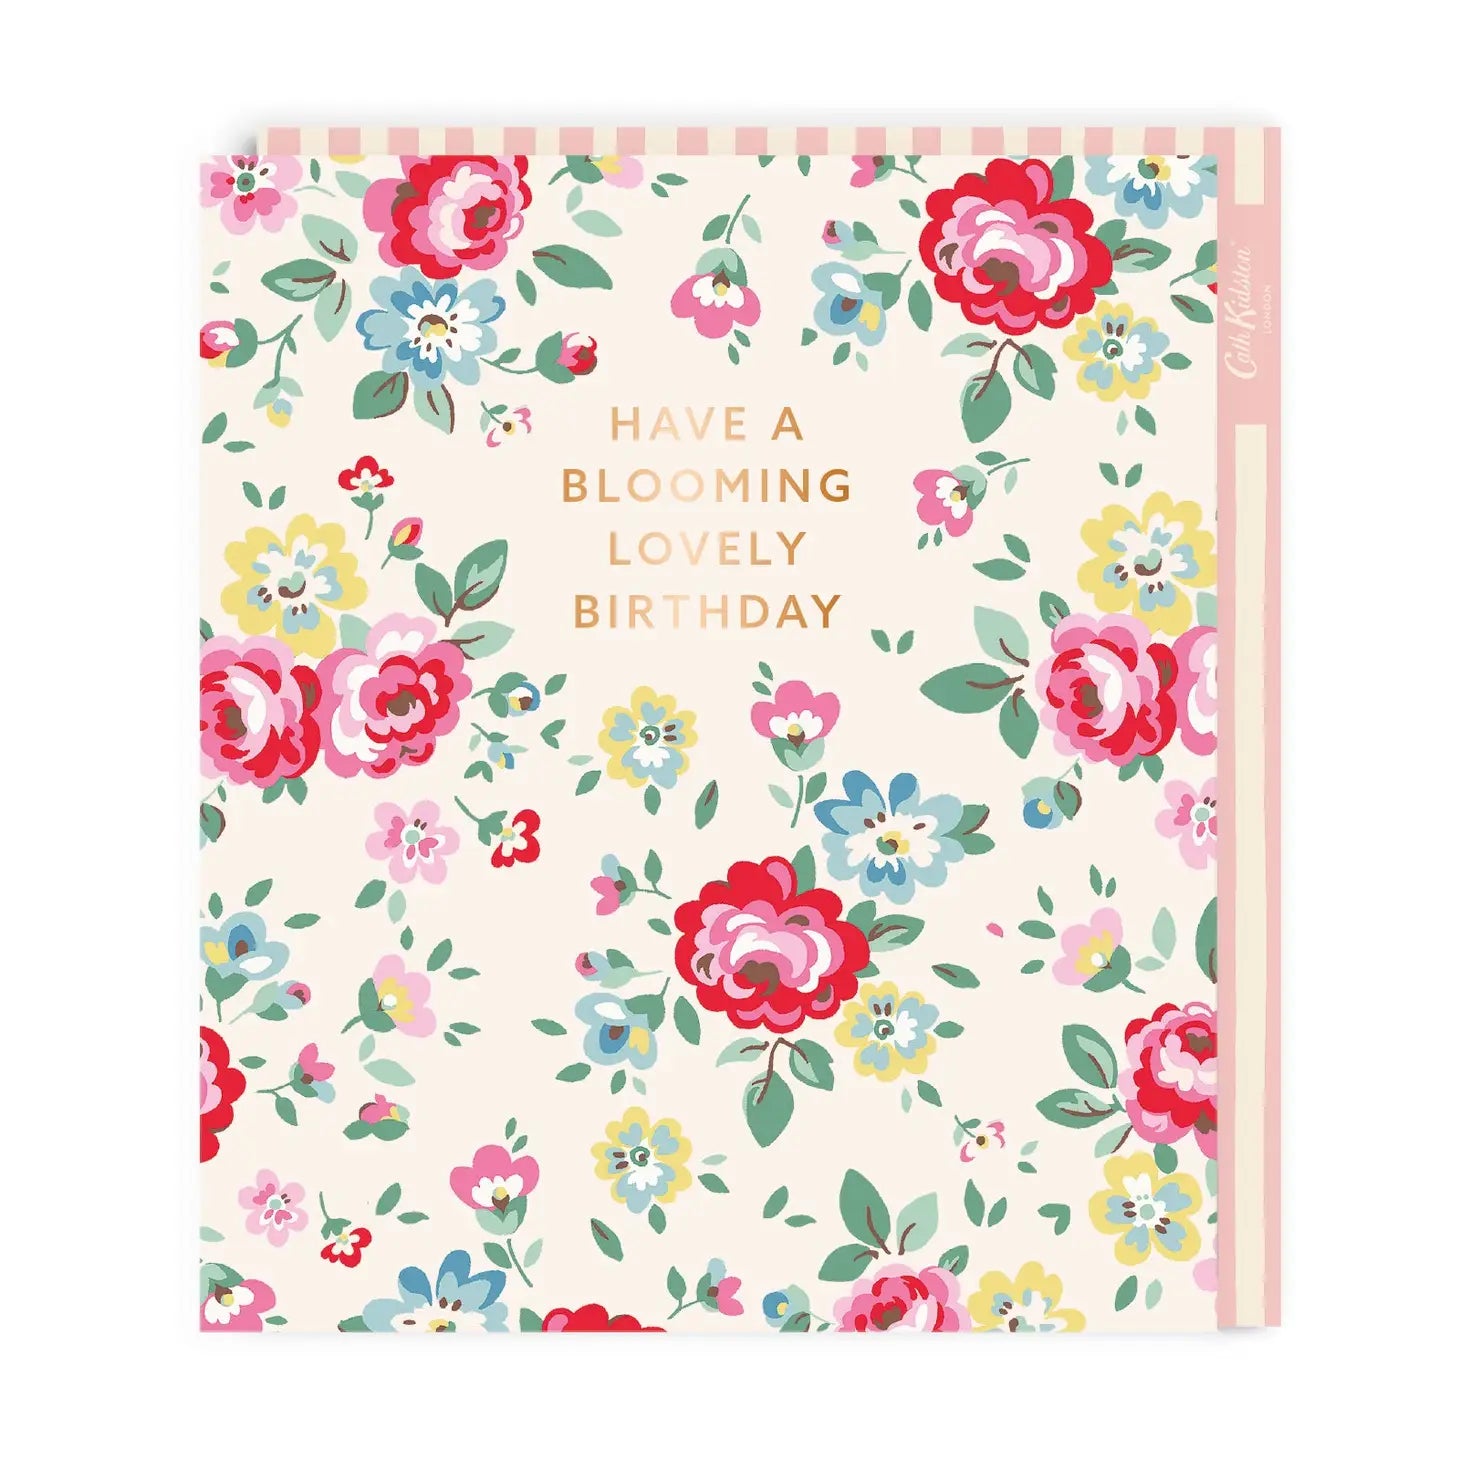 Cath Kidson "Have a blooming lovely Birthday" Large Greeting Card